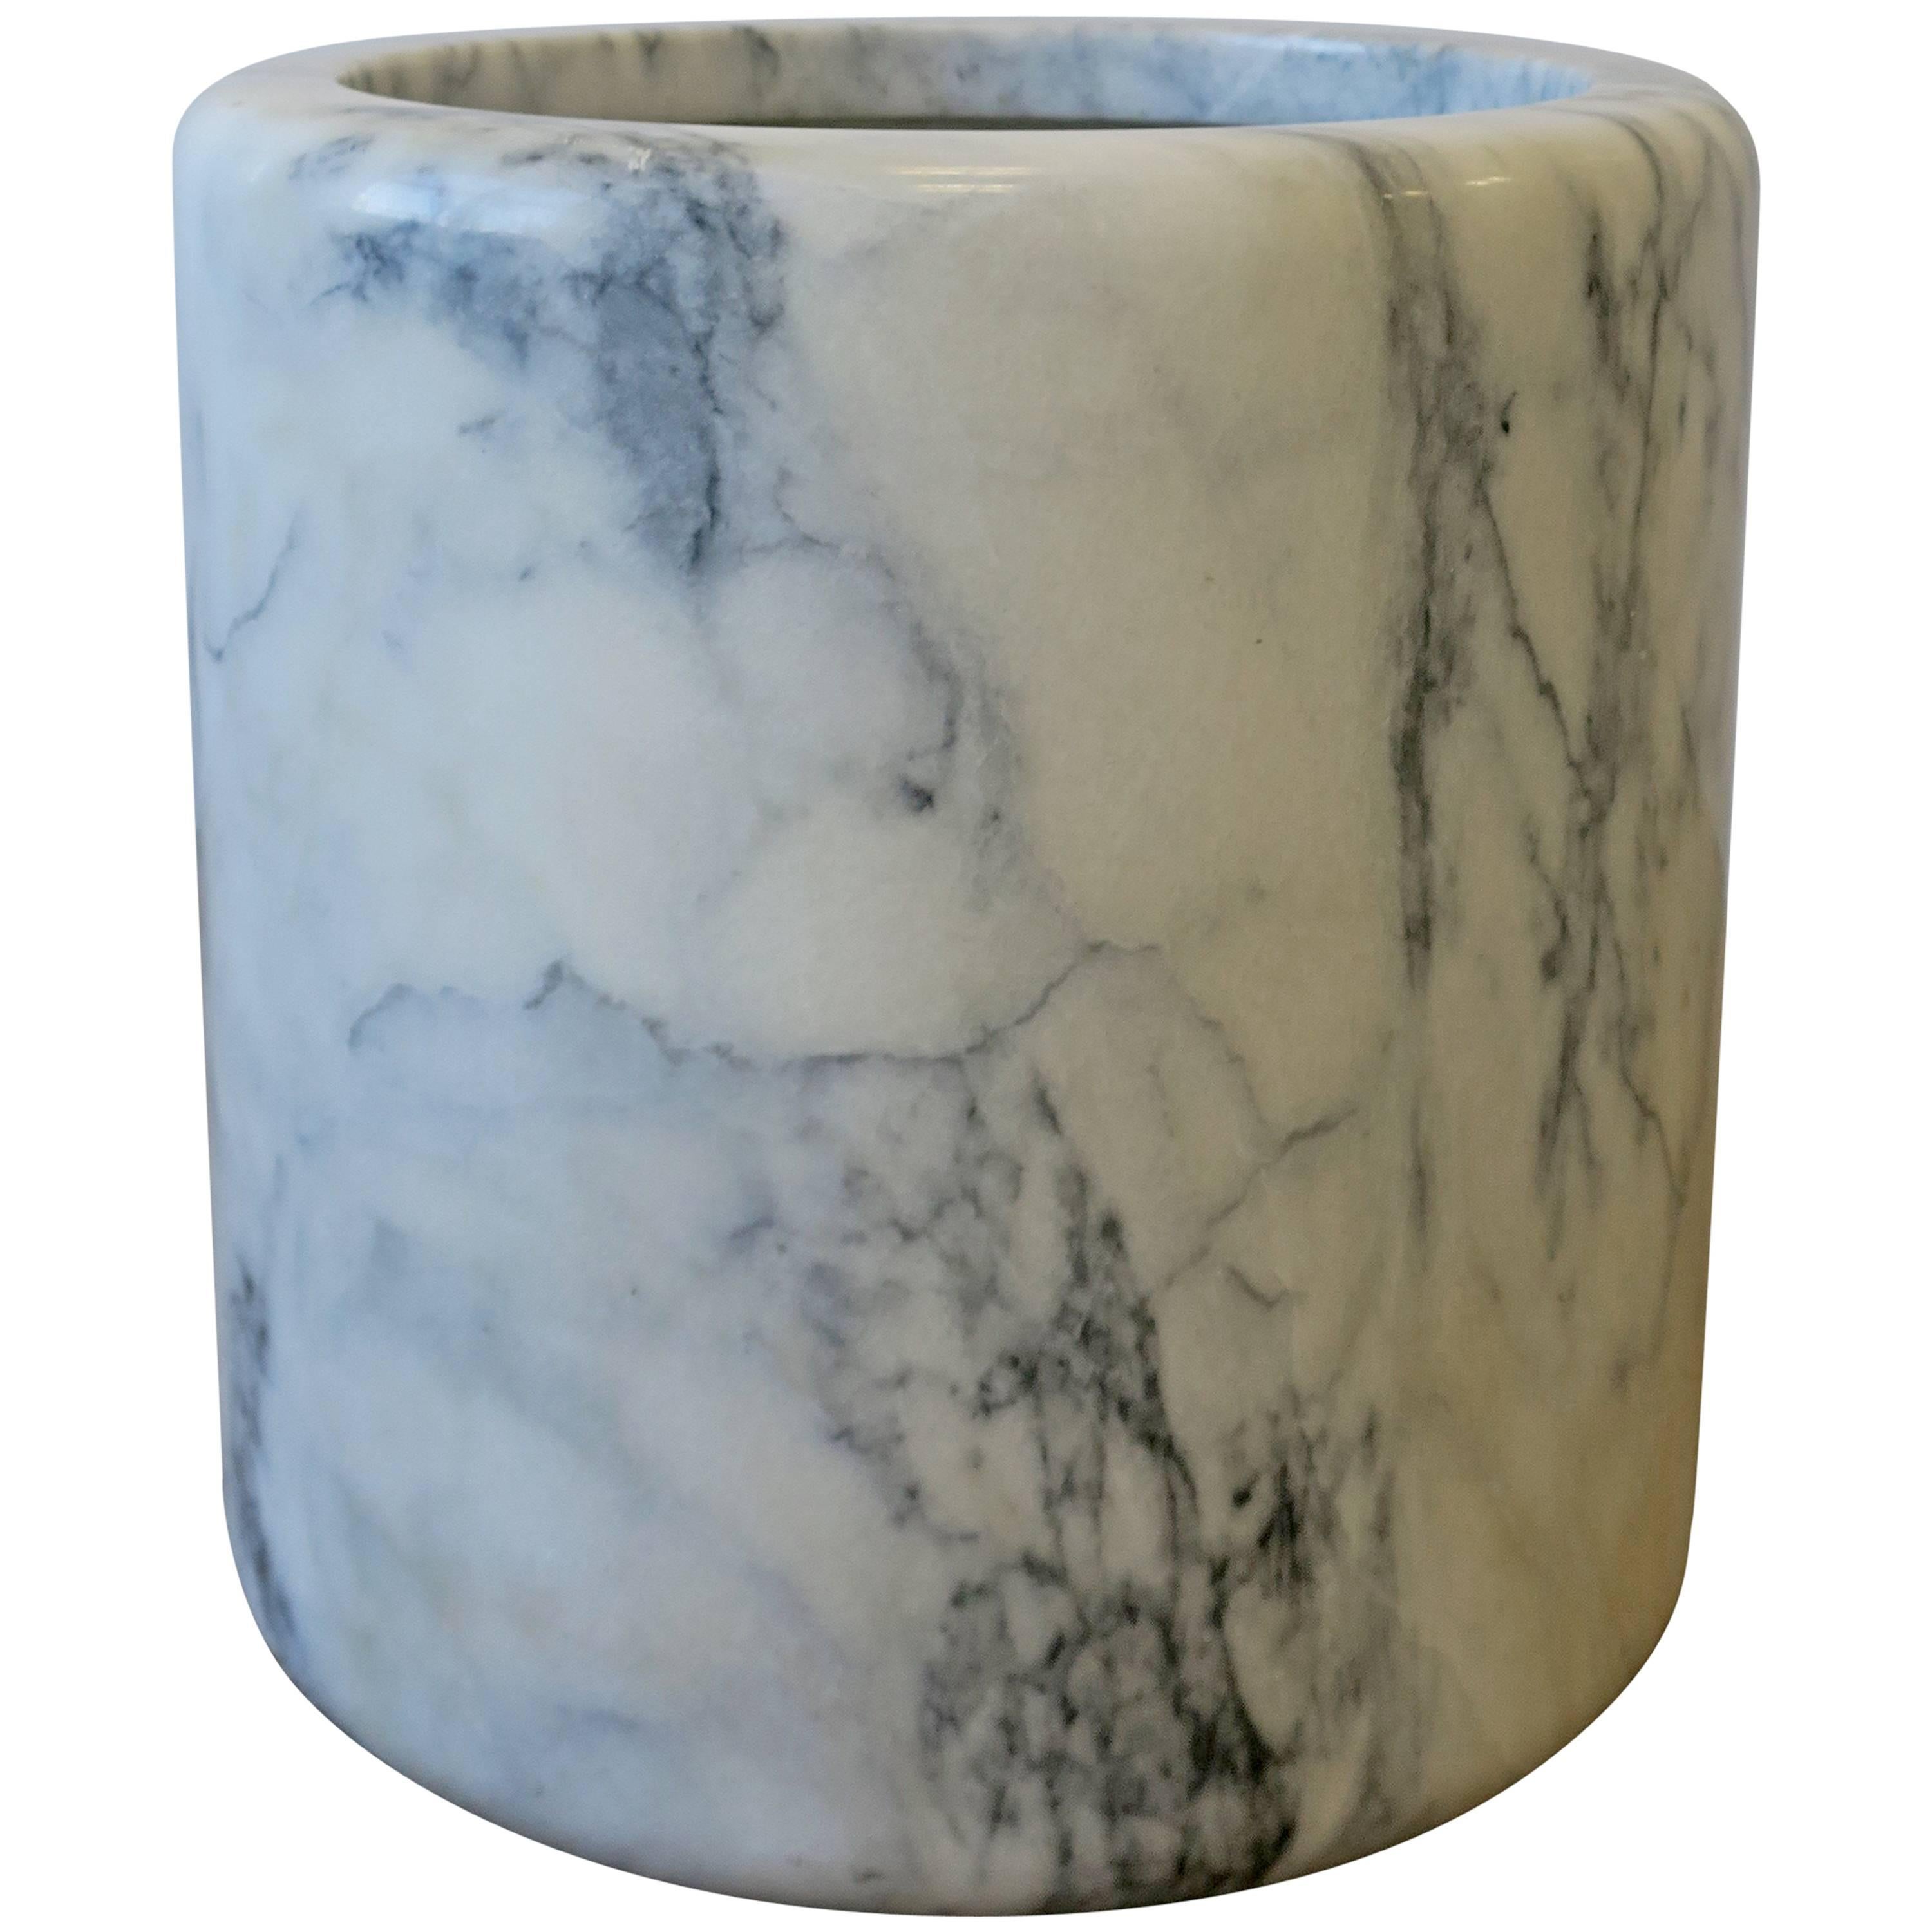 Substantial Large Marble Vessel